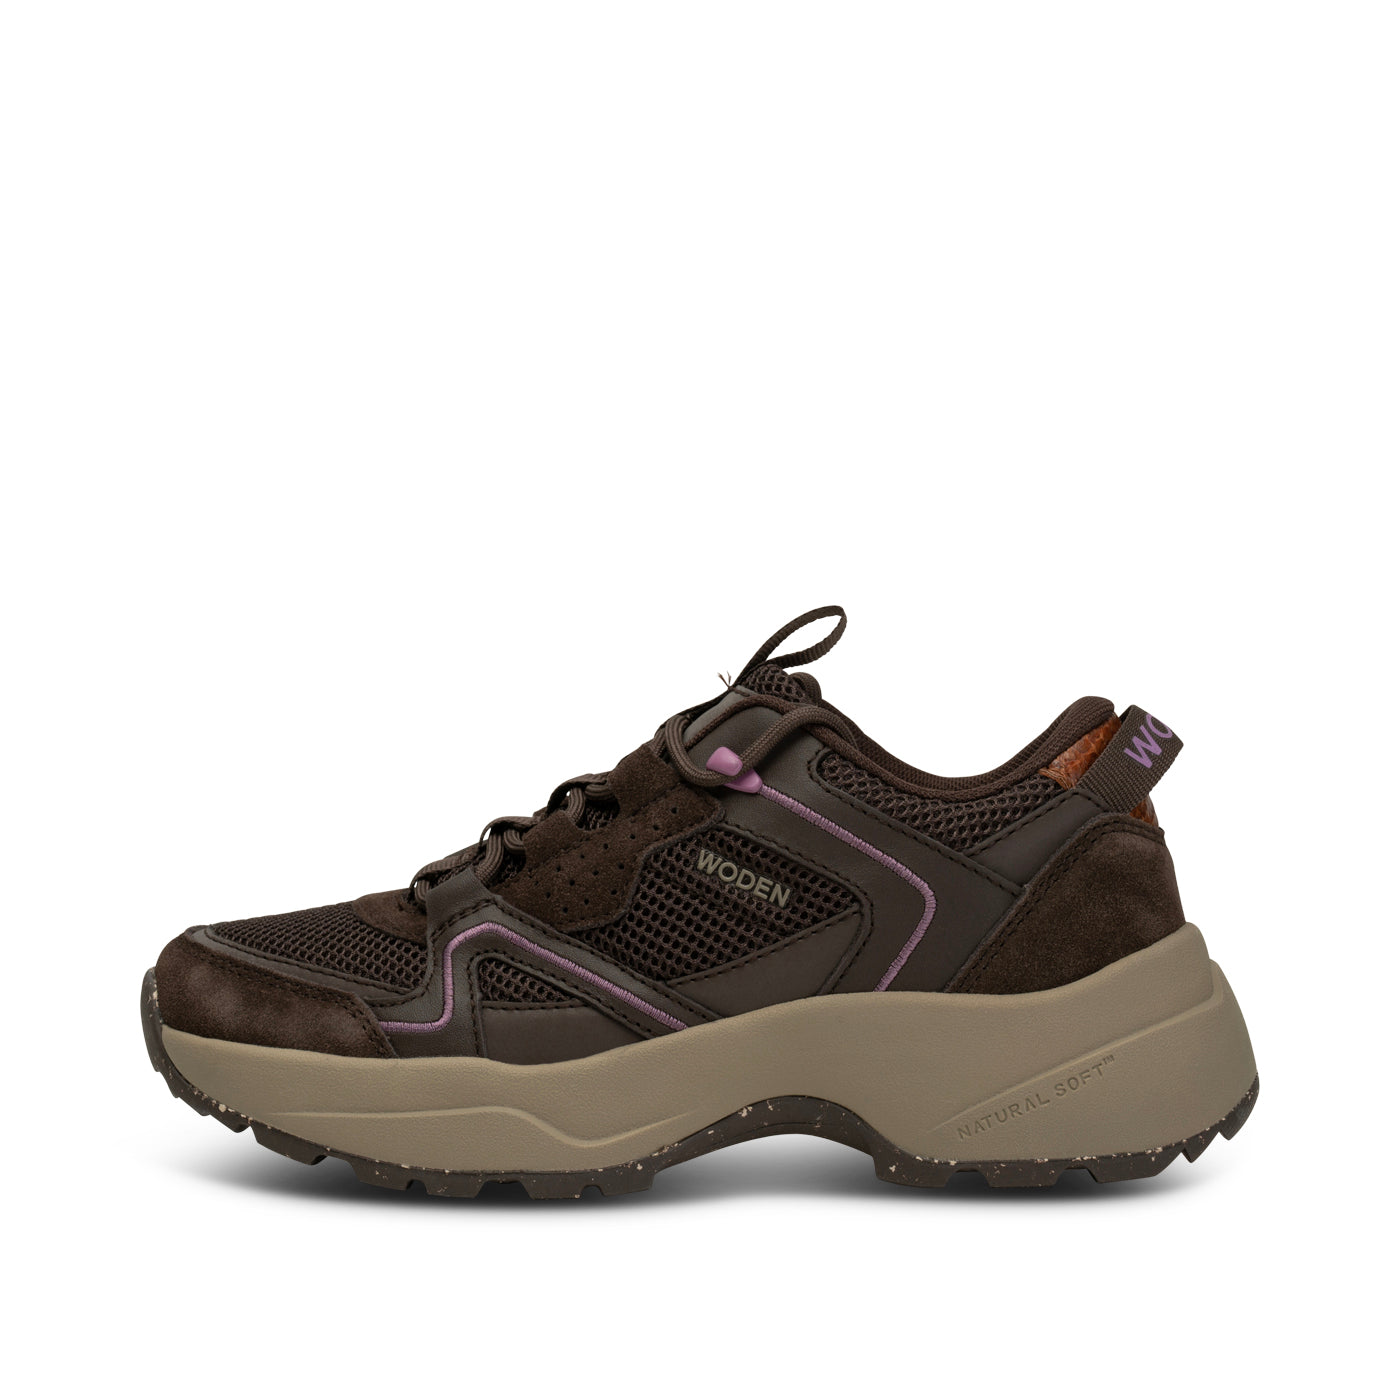 WODEN Sif Reflective Sneakers 063 Chocolate